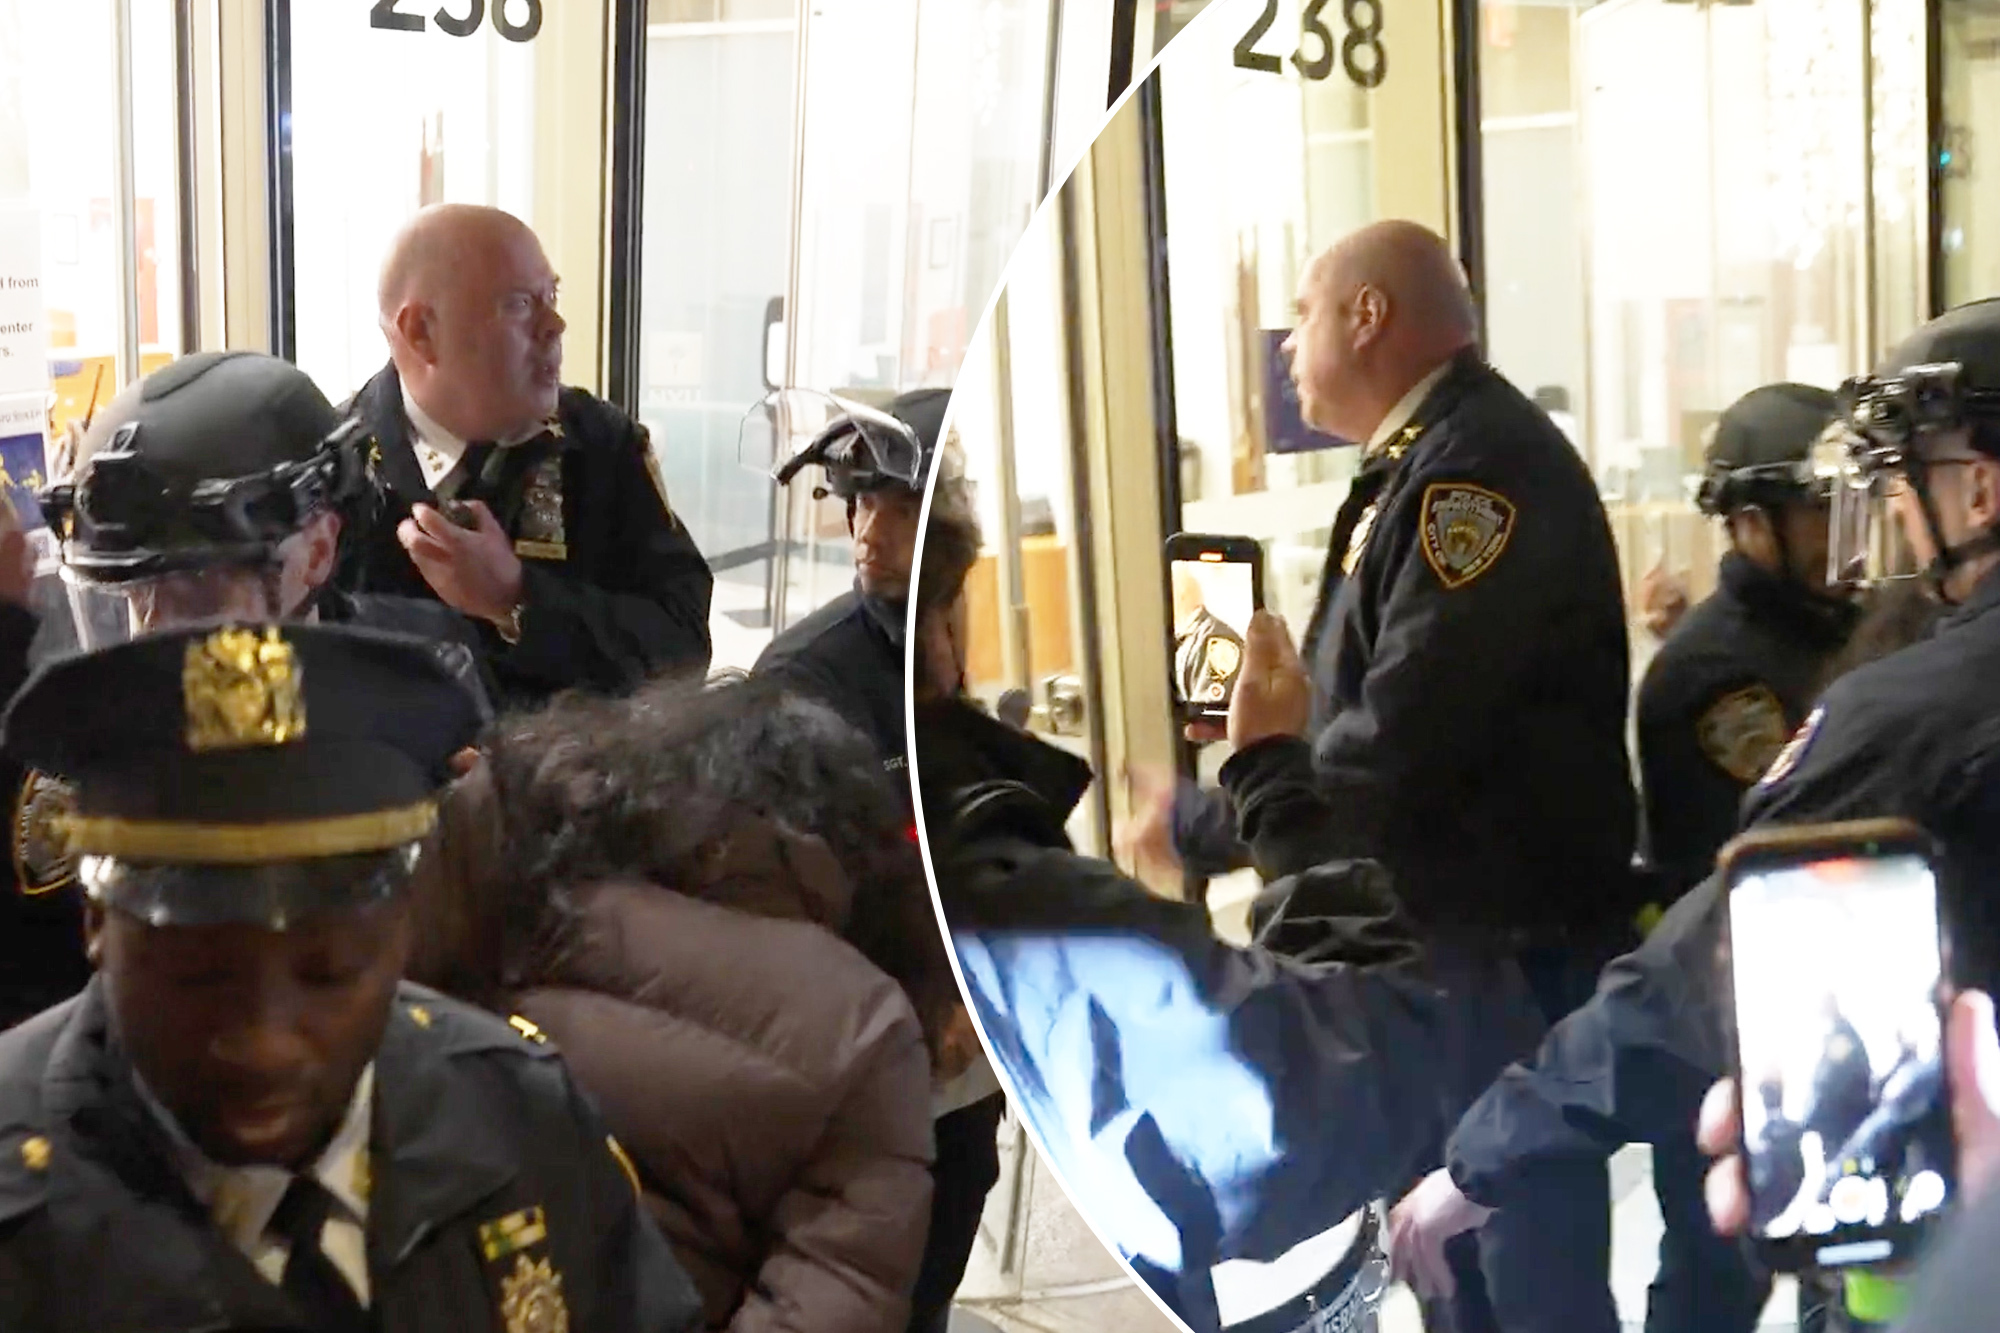 Shocking video shows anti-Israel protesters at NYU swarm NYPD chief and his officers (Video)